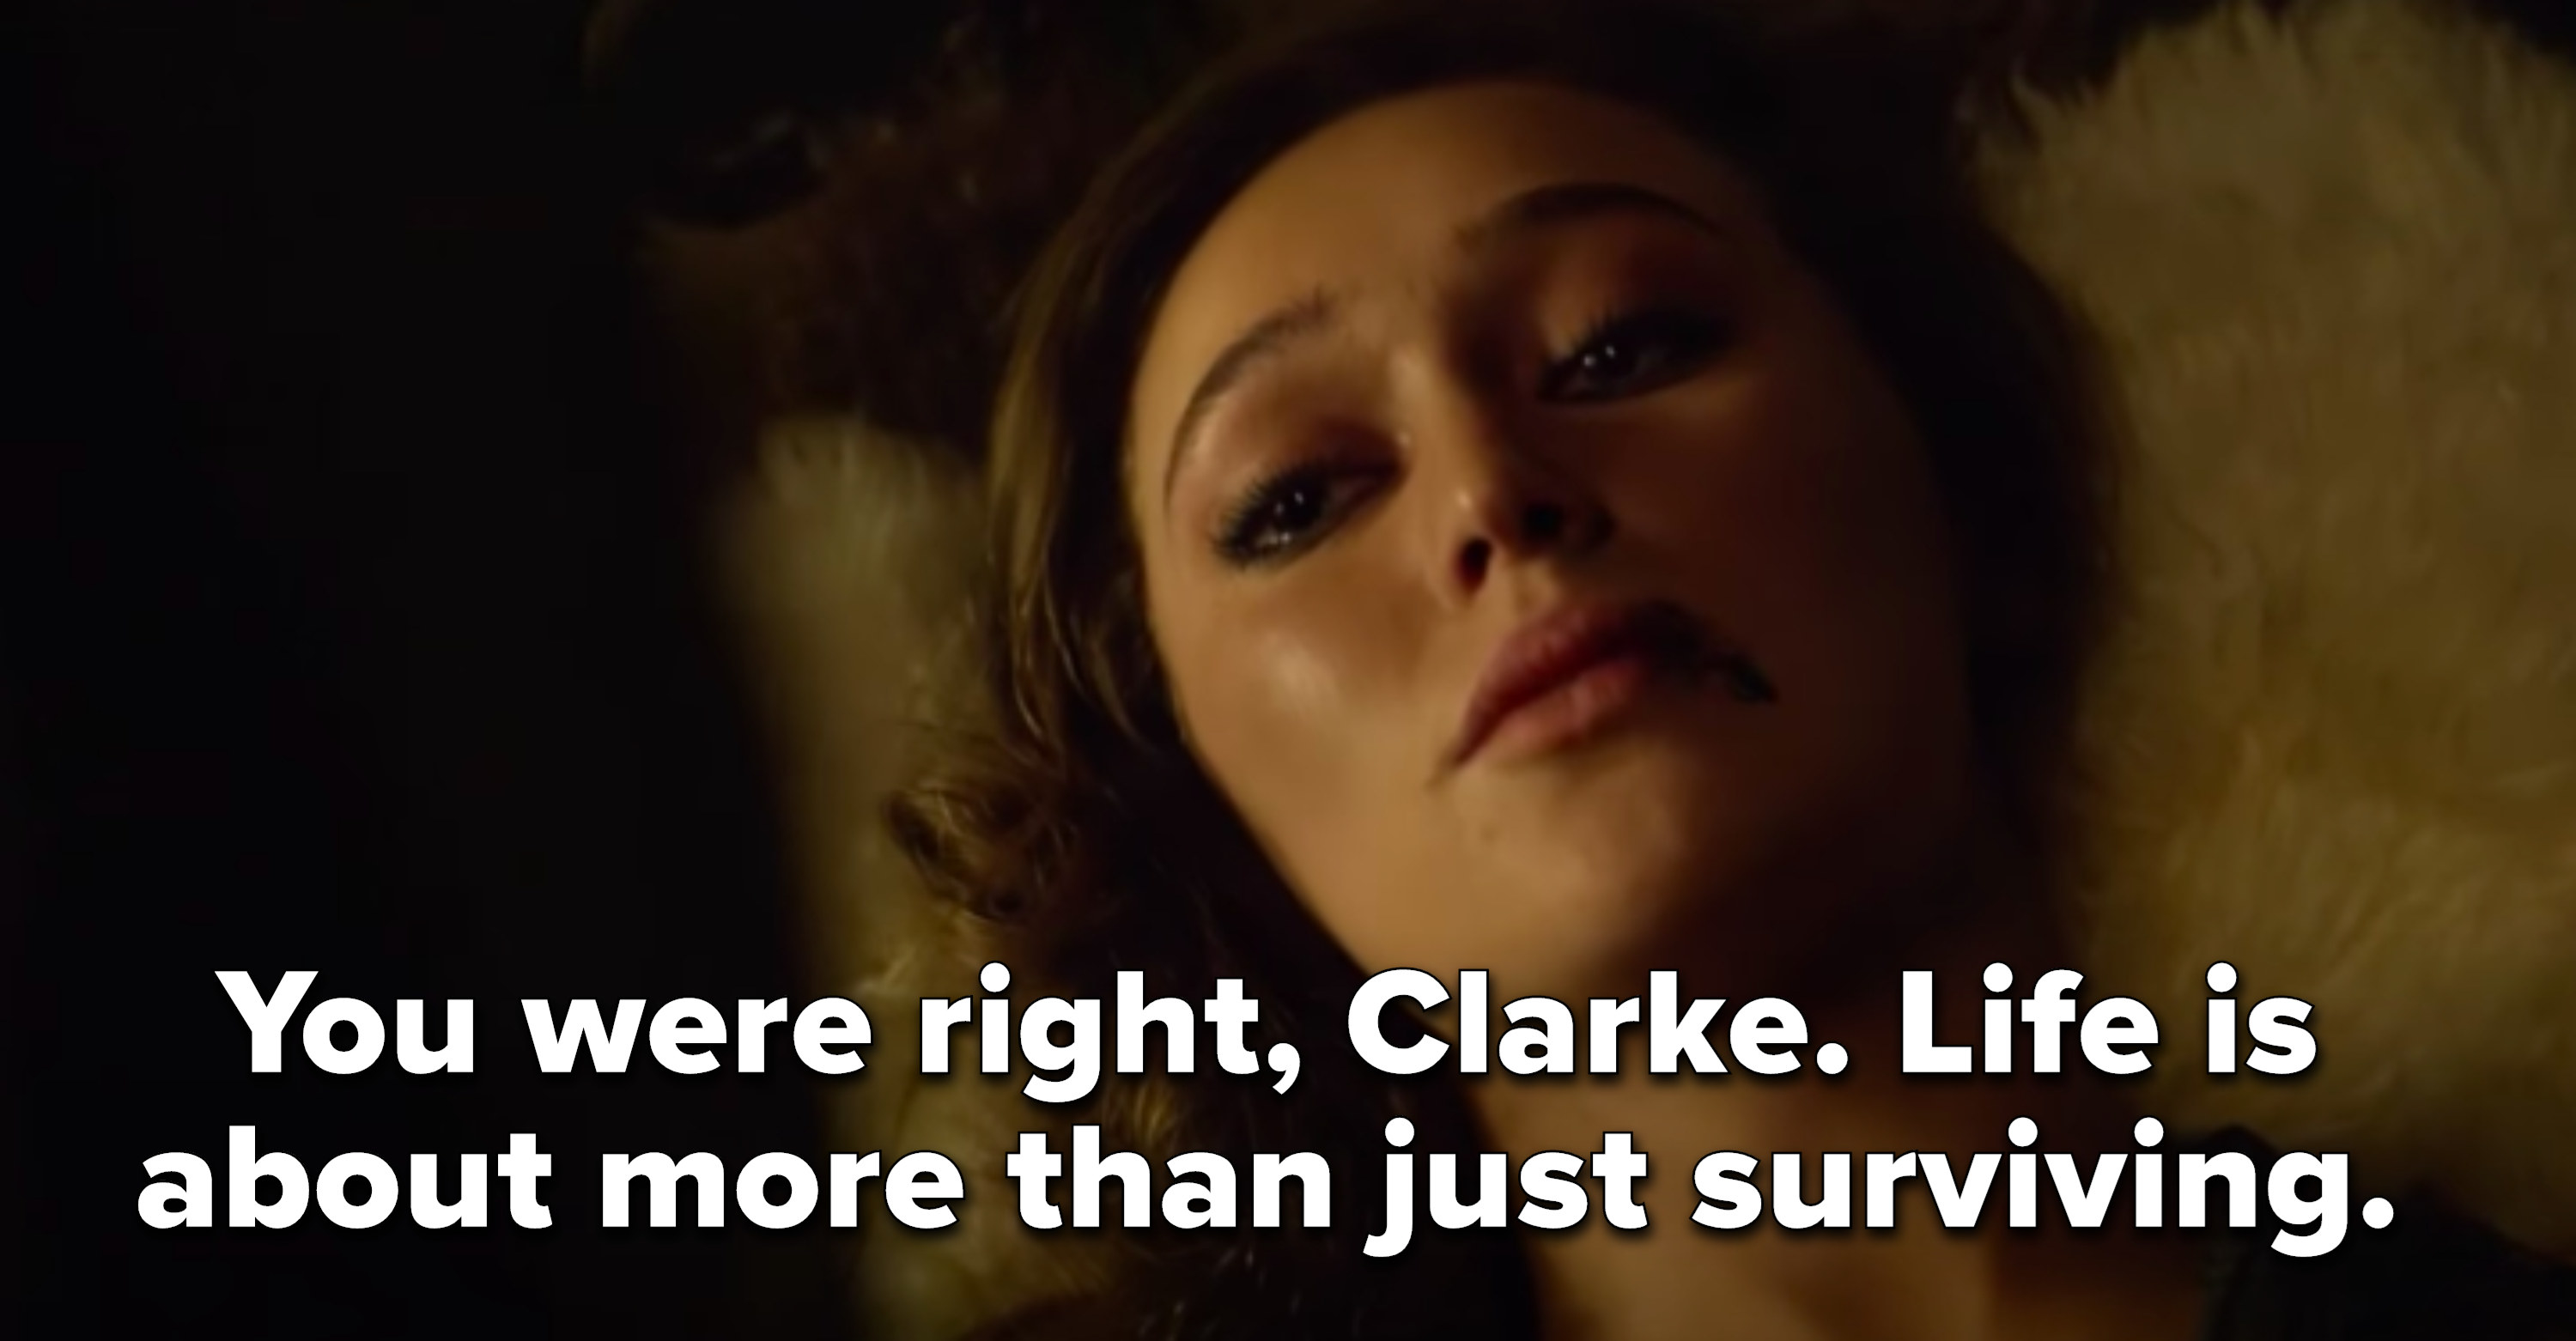 Lexa: &quot;You were right, Clarke. Life is about more than just surviving.&quot;